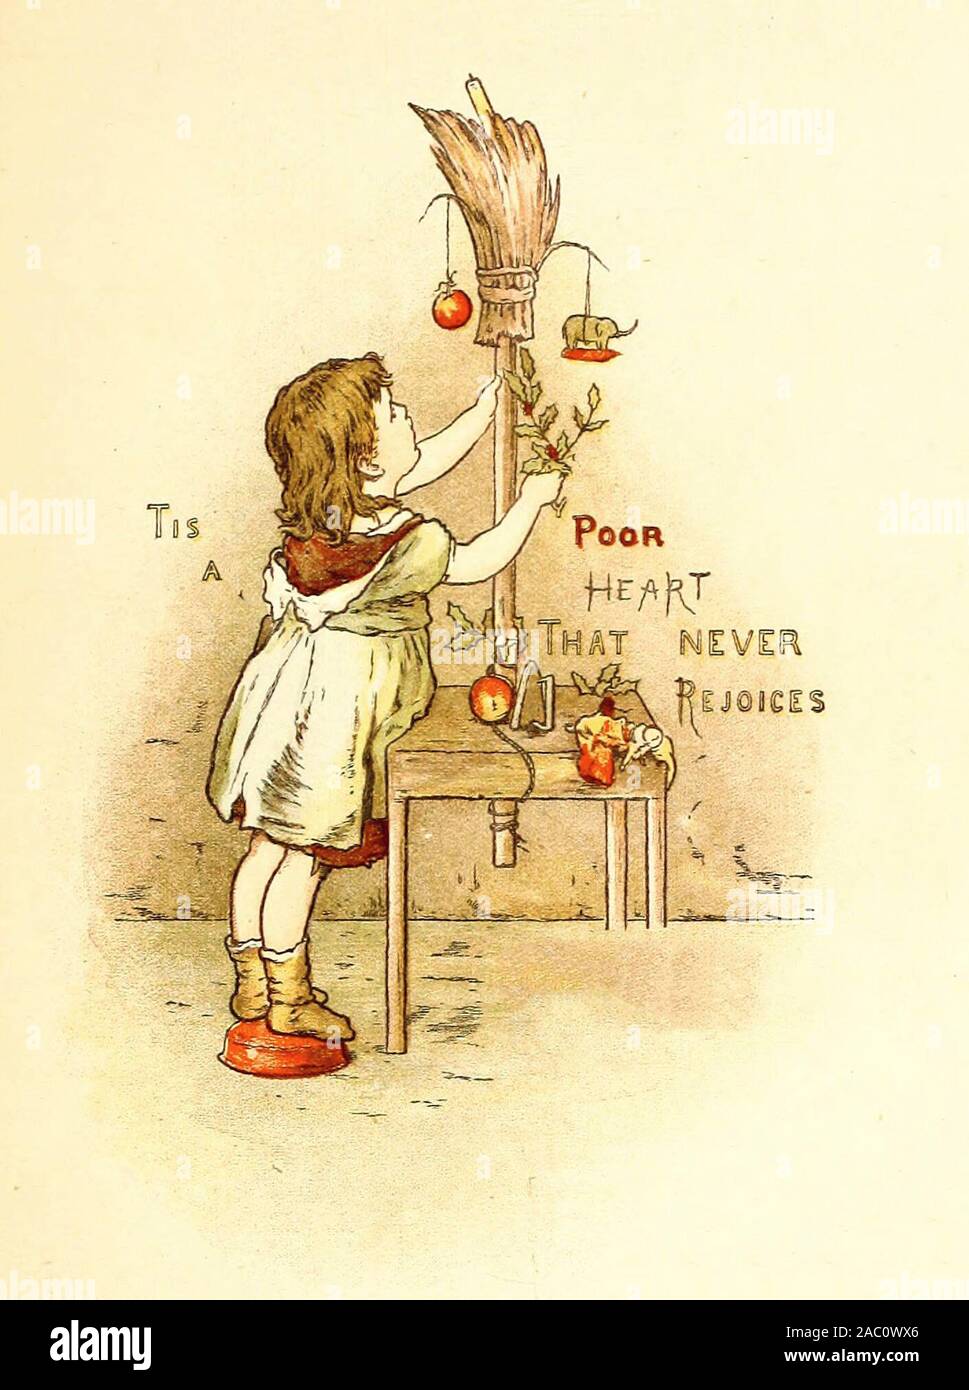 Tis a Poor Heart that Never Rejoices - A Vintage Illustration of an Old Proverb Stock Photo